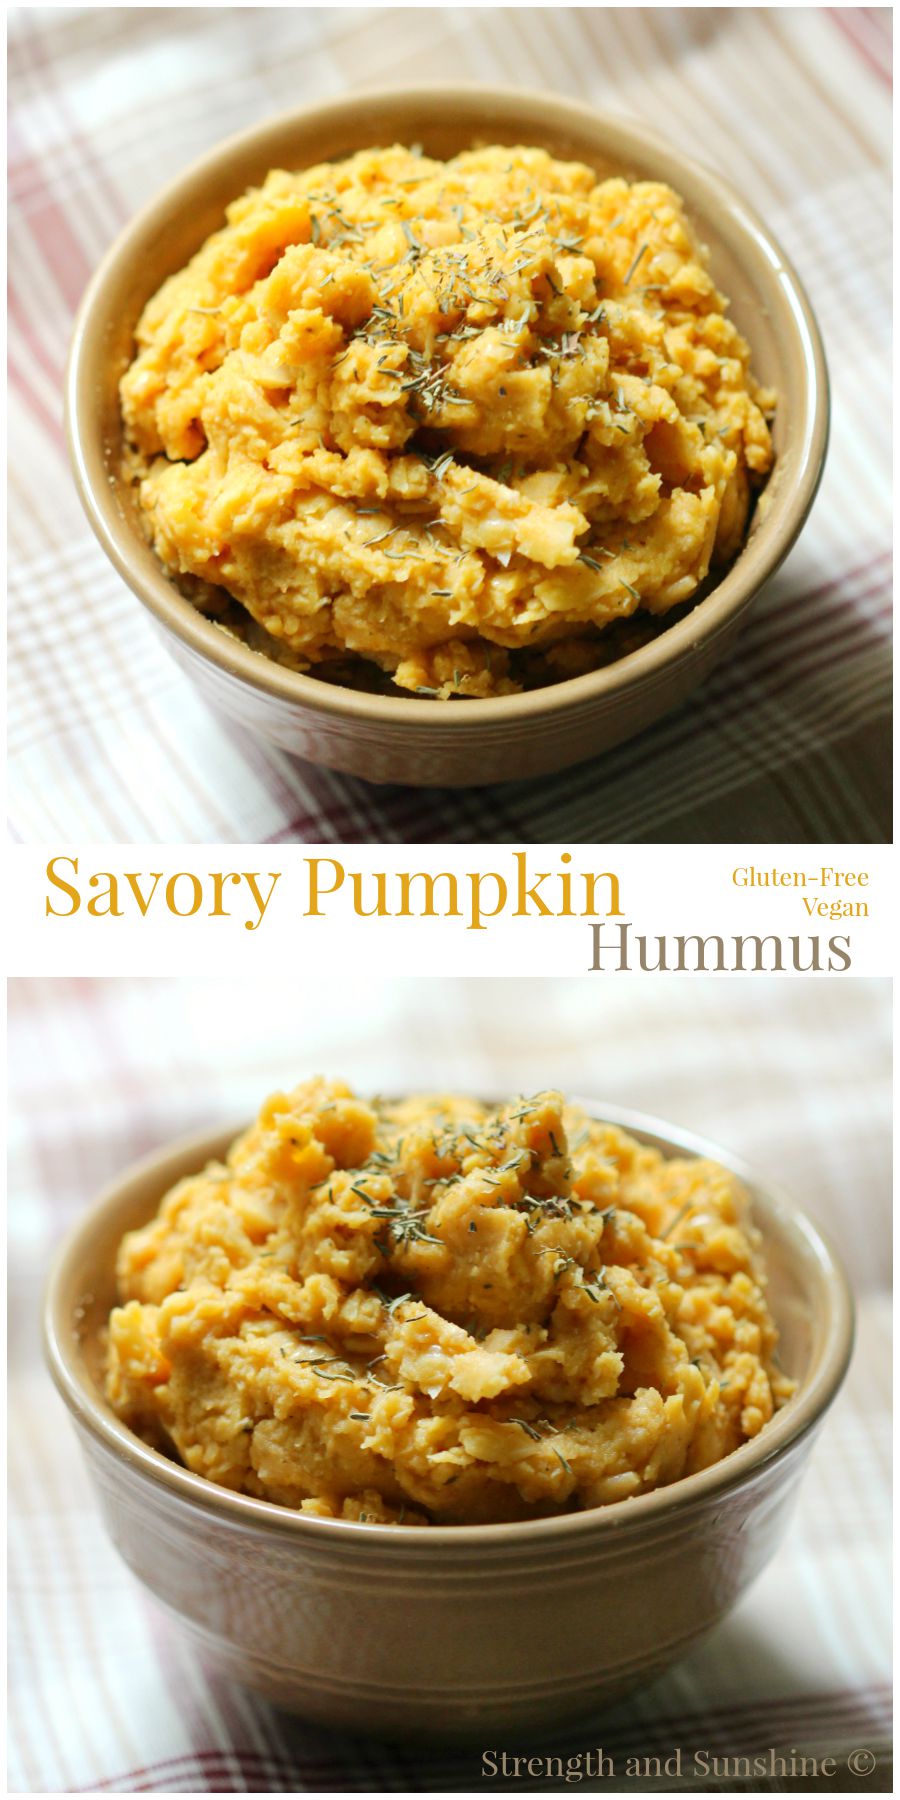 Savory Pumpkin Hummus | Strength and Sunshine @RebeccaGF666 From dipping to scooping, spreading to mixing in, hummus is one versatile food. This gluten-free and vegan savory pumpkin hummus is the perfect flavor for all you fall snacking, cooking, and tailgating!